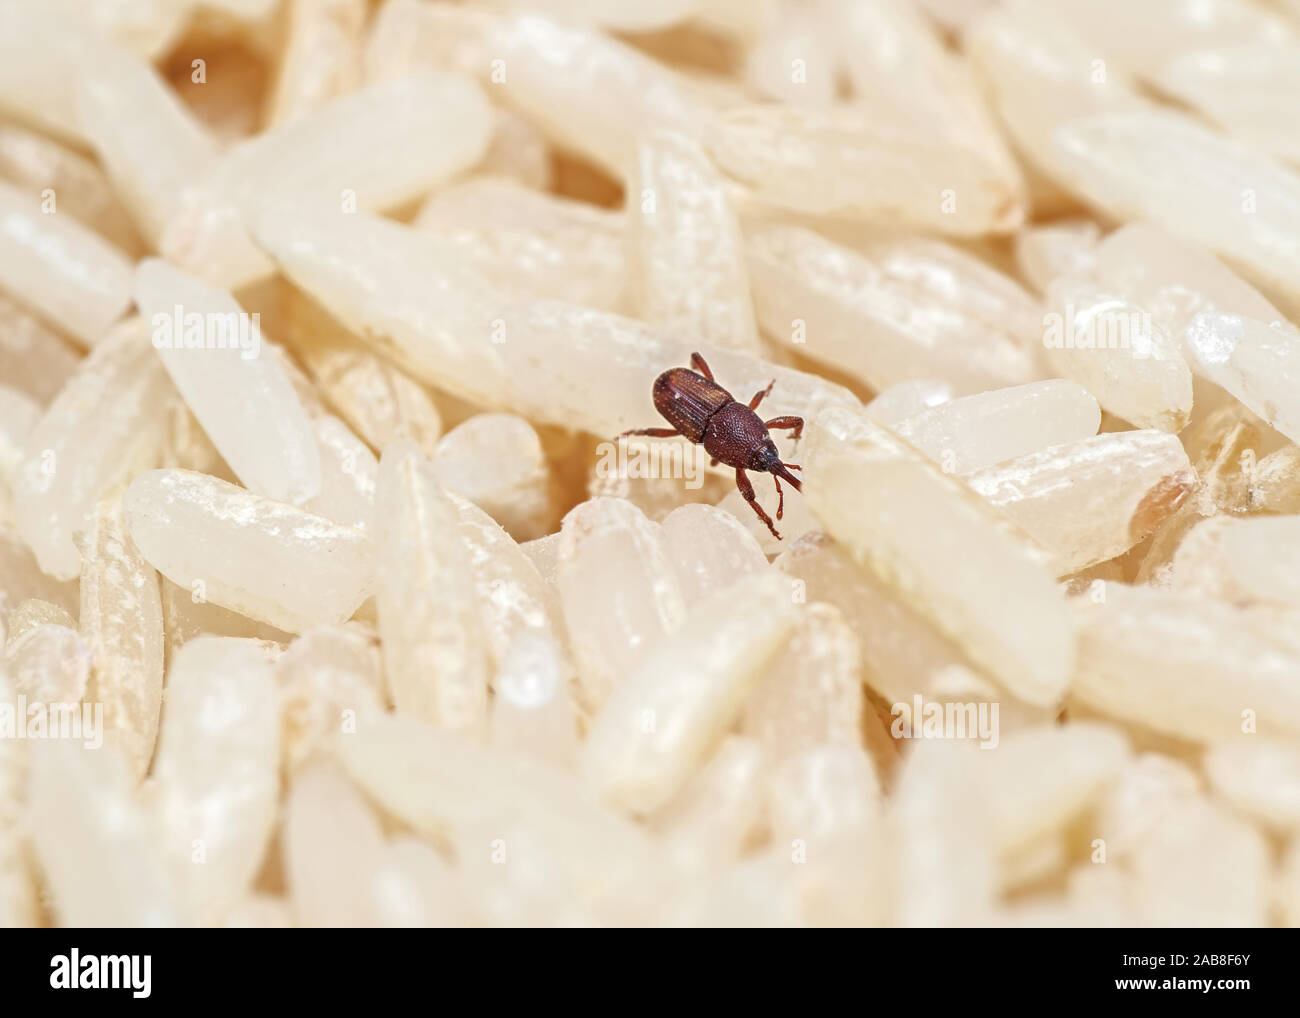 Macro Photography of Rice Weevil or Sitophilus oryzae on Raw Rice Stock Photo